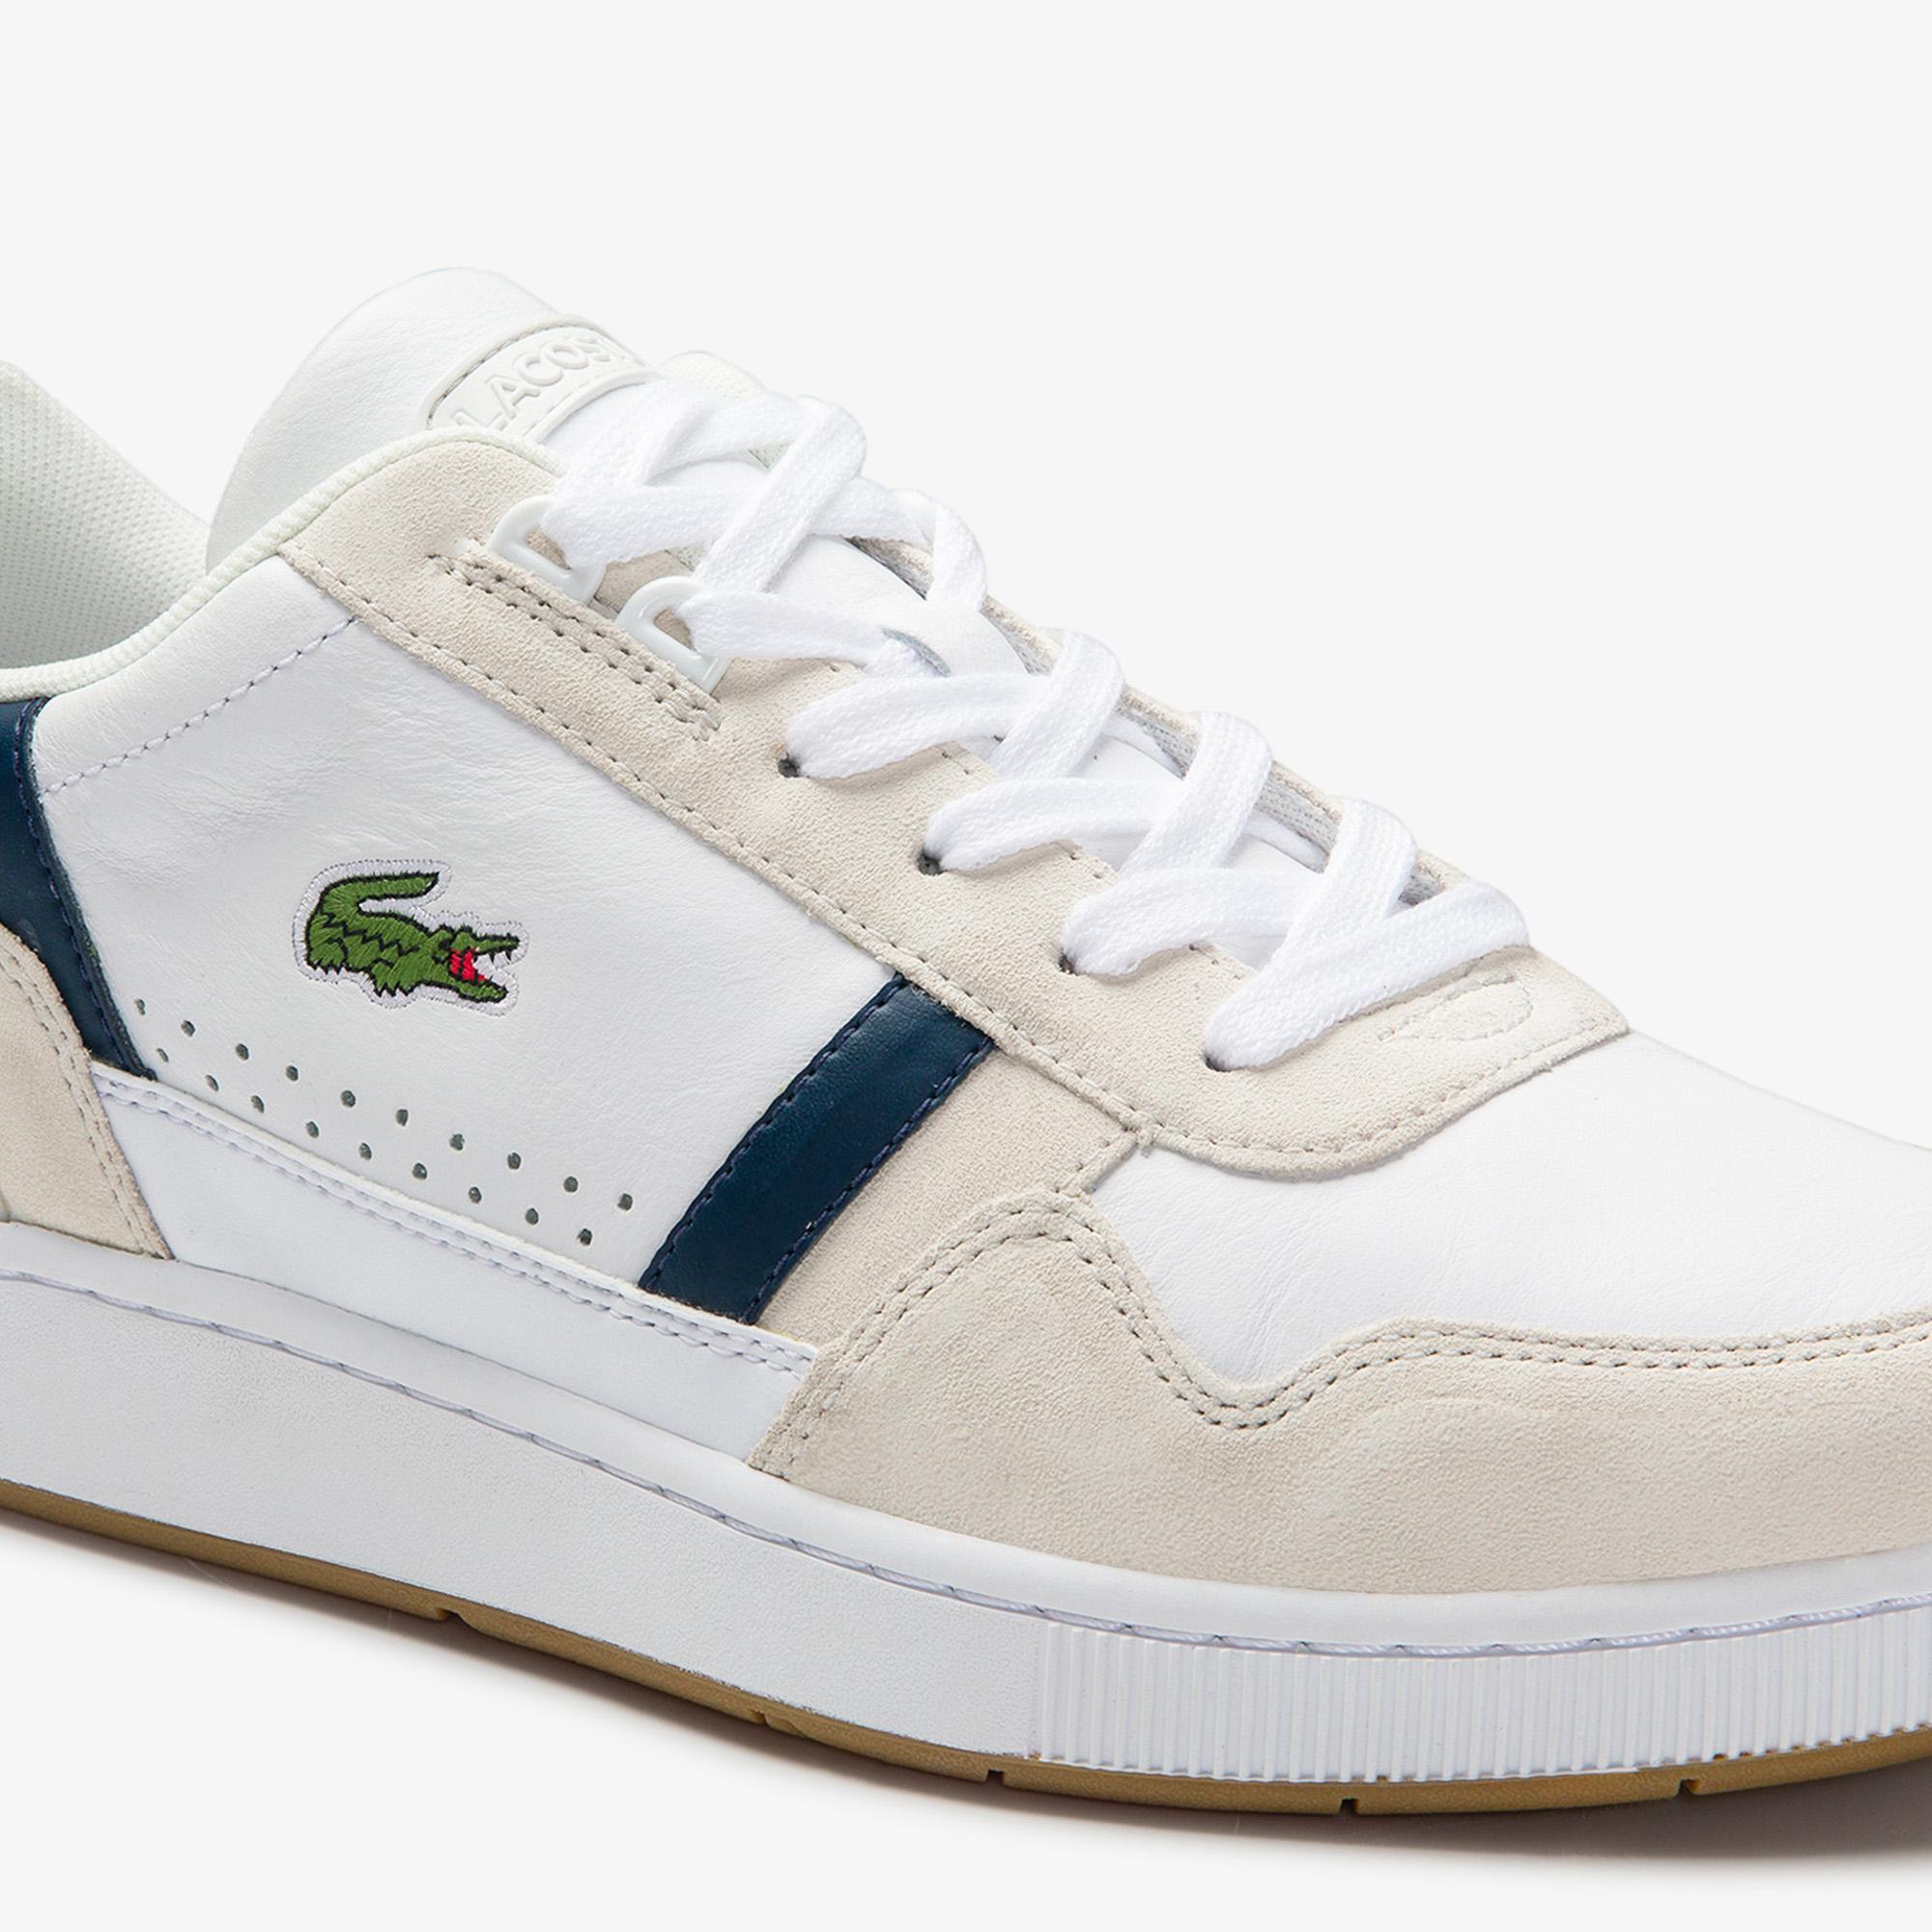 Lacoste Men's T-Clip Tricolour Leather and Suede Trainers